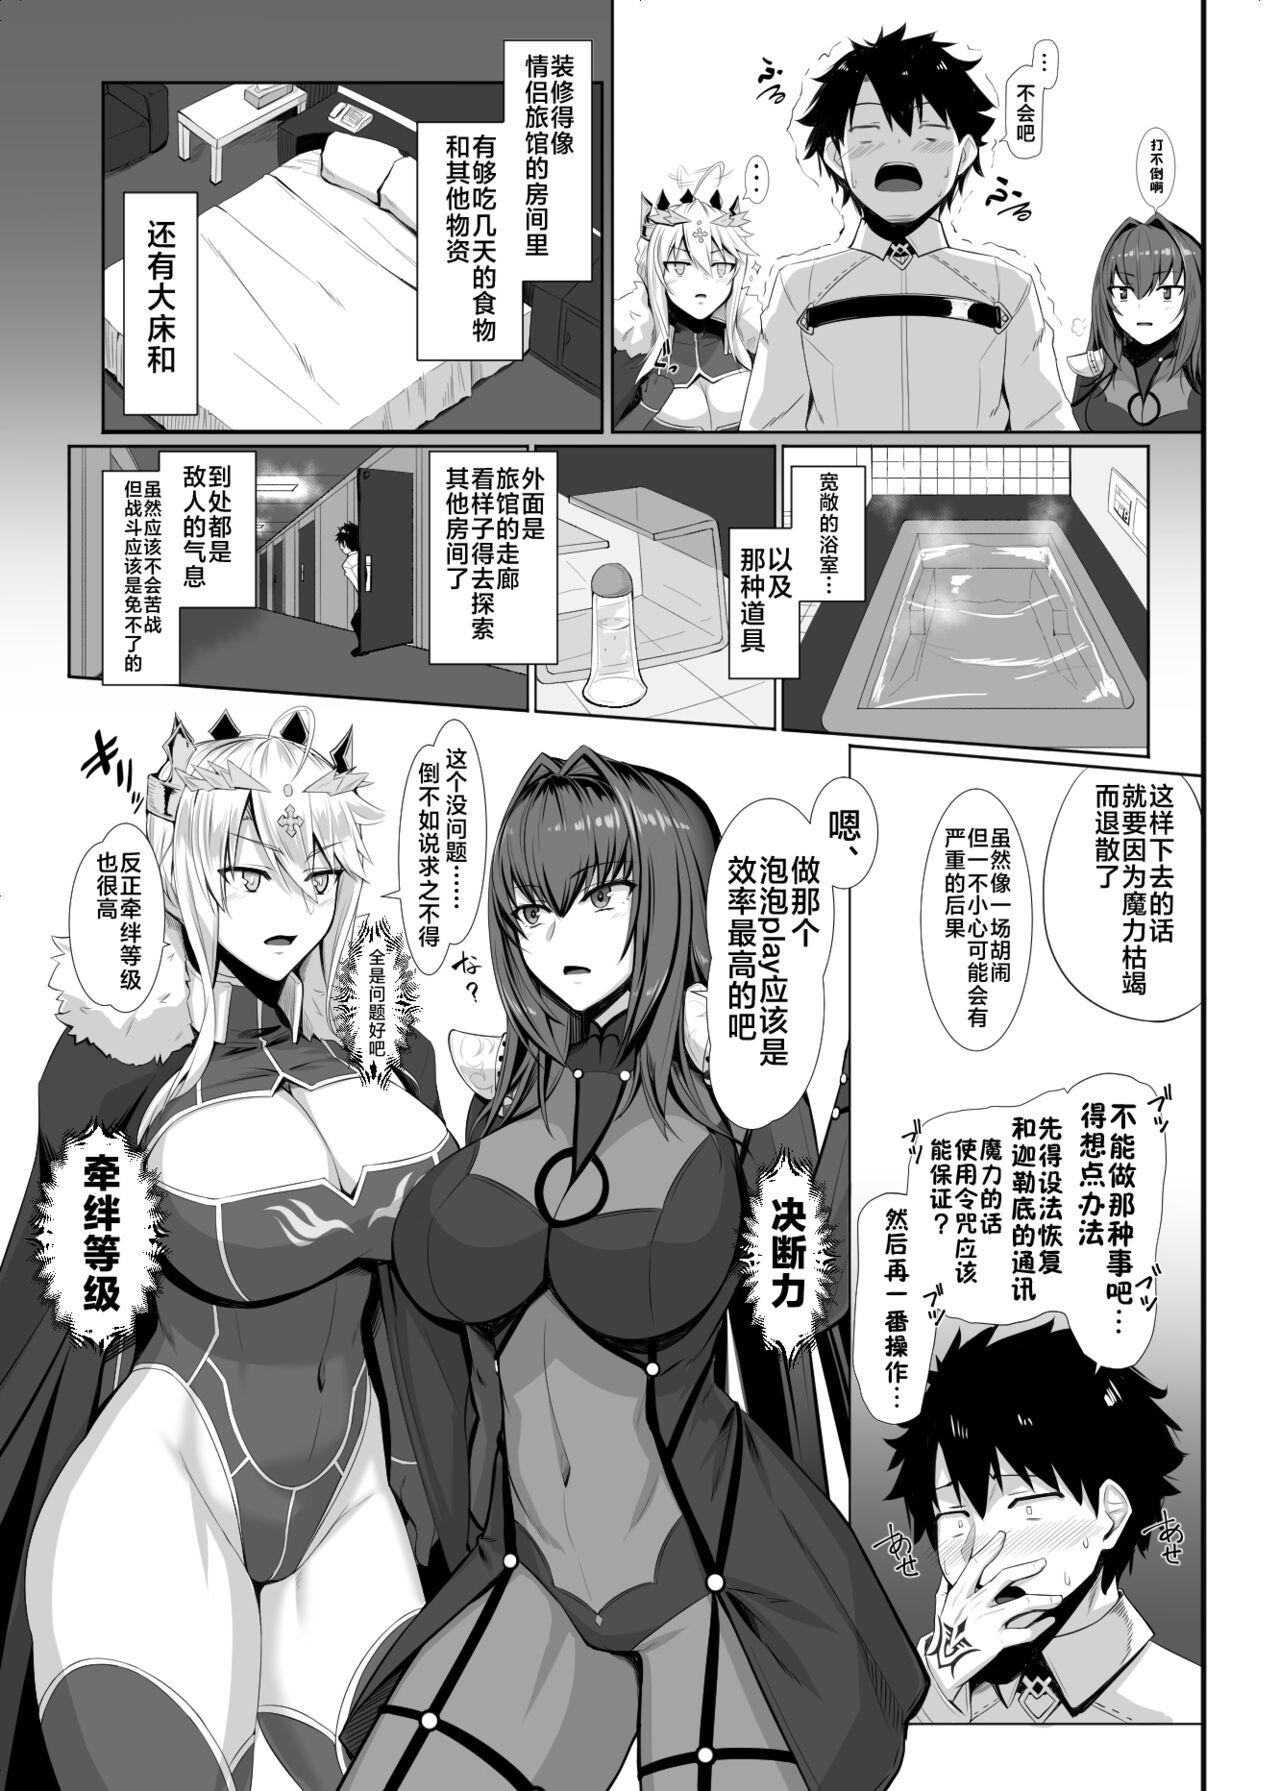 Teenfuns ランランランサーズ - Fate grand order Sesso - Page 4